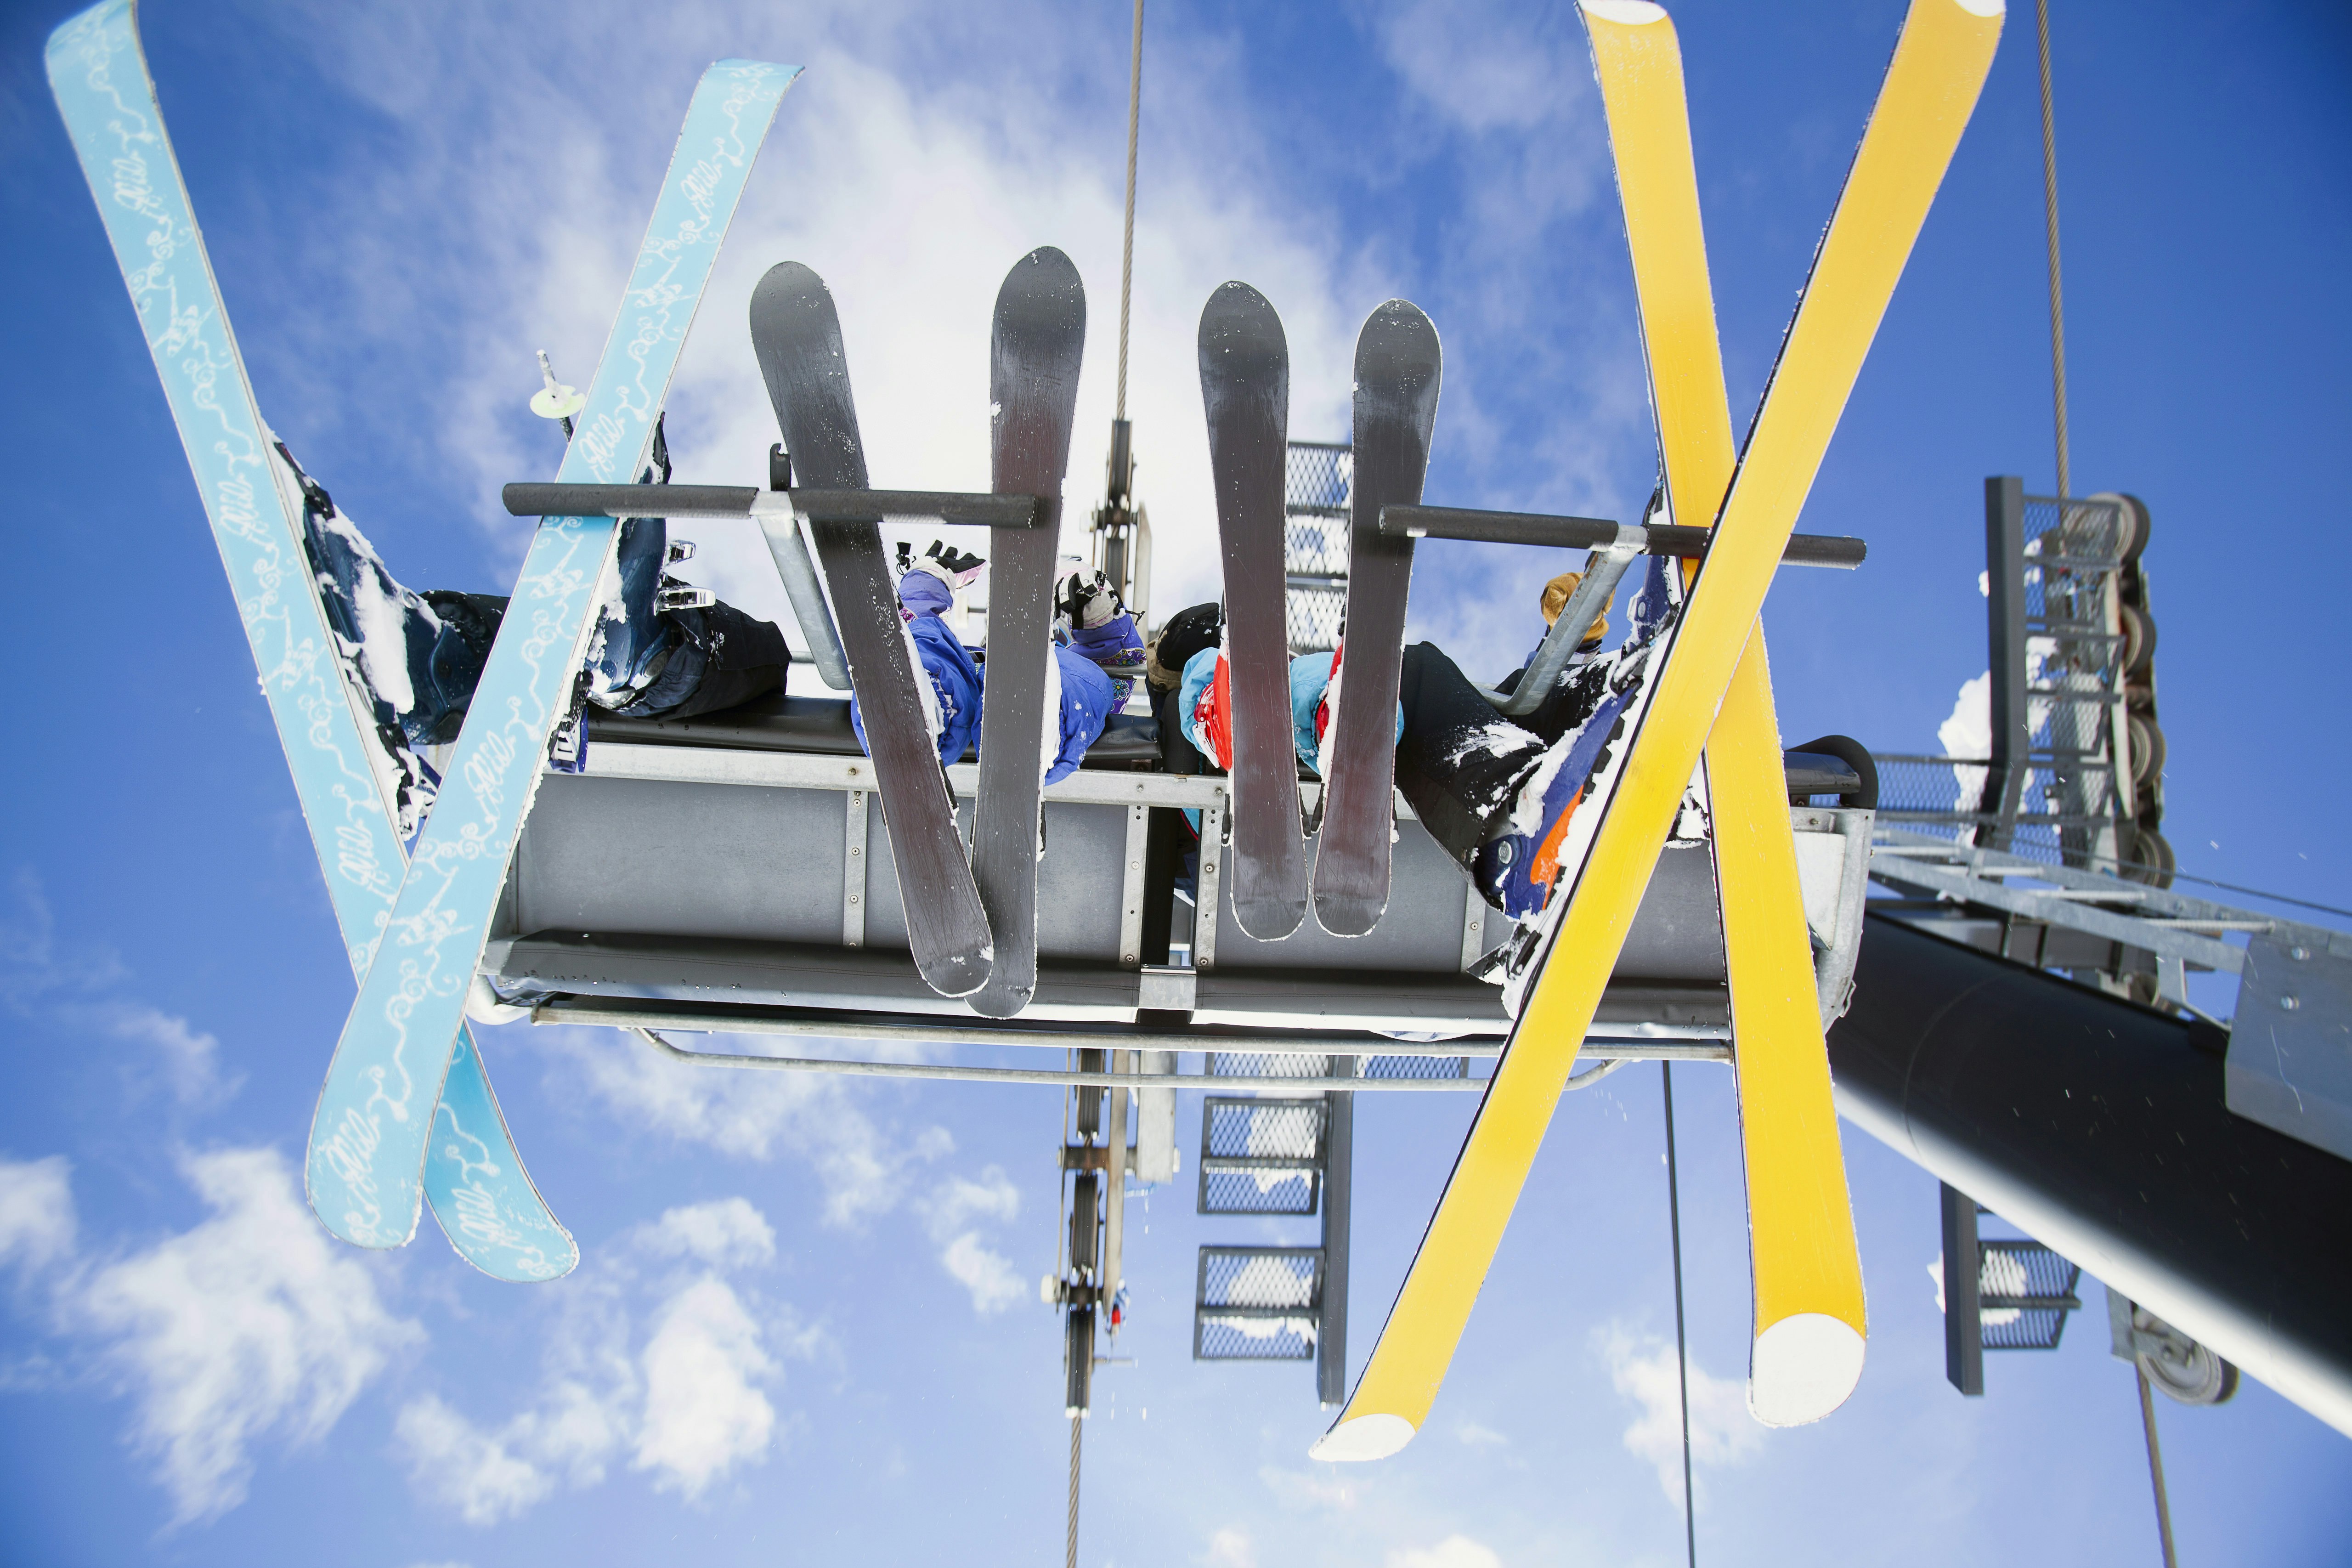 A family of four sit on a chairlift with their skis dangling below them. The image is taken from ground level looking up, with a cloudy blue sky providing the backdrop.